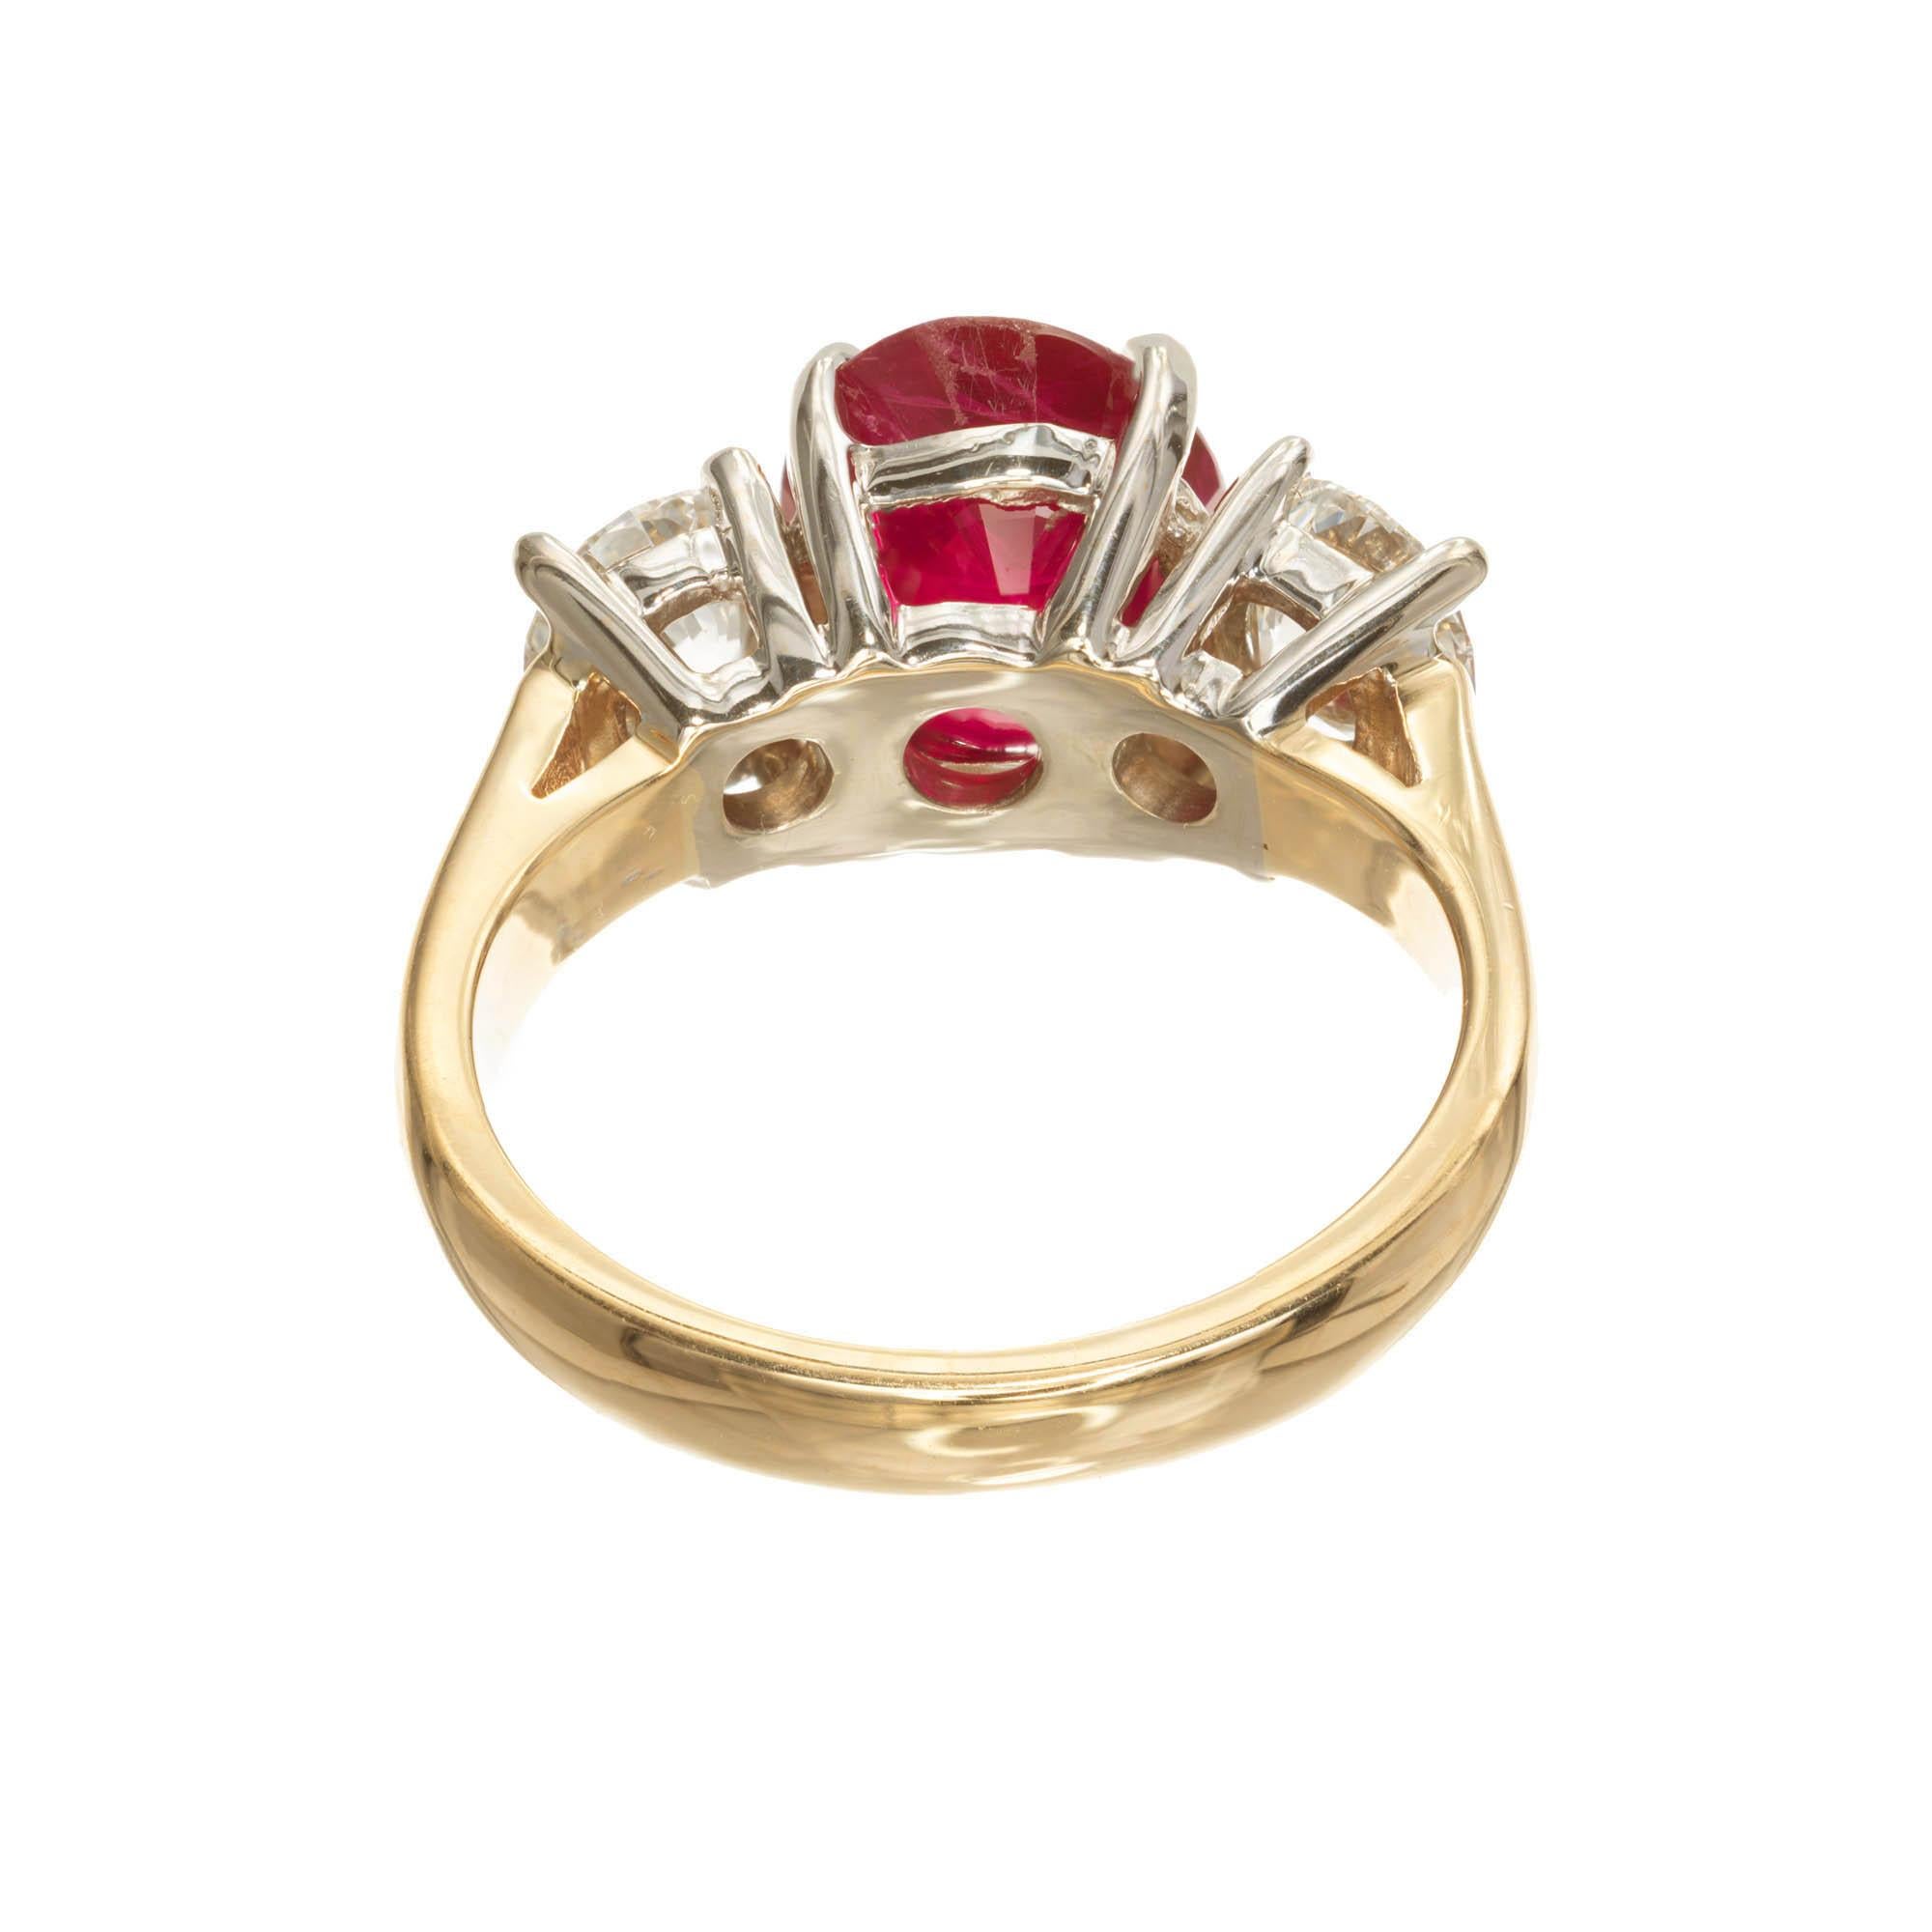 Peter Suchy ruby and diamond three-stone engagement ring.  AGL Certified natural Burma ruby 3.16 carats. Simple heat minor clarity enhancement. Two bright sparkly round diamonds 1.12 carats total. in a two-tone 14k yellow gold.

1 oval red SI ruby